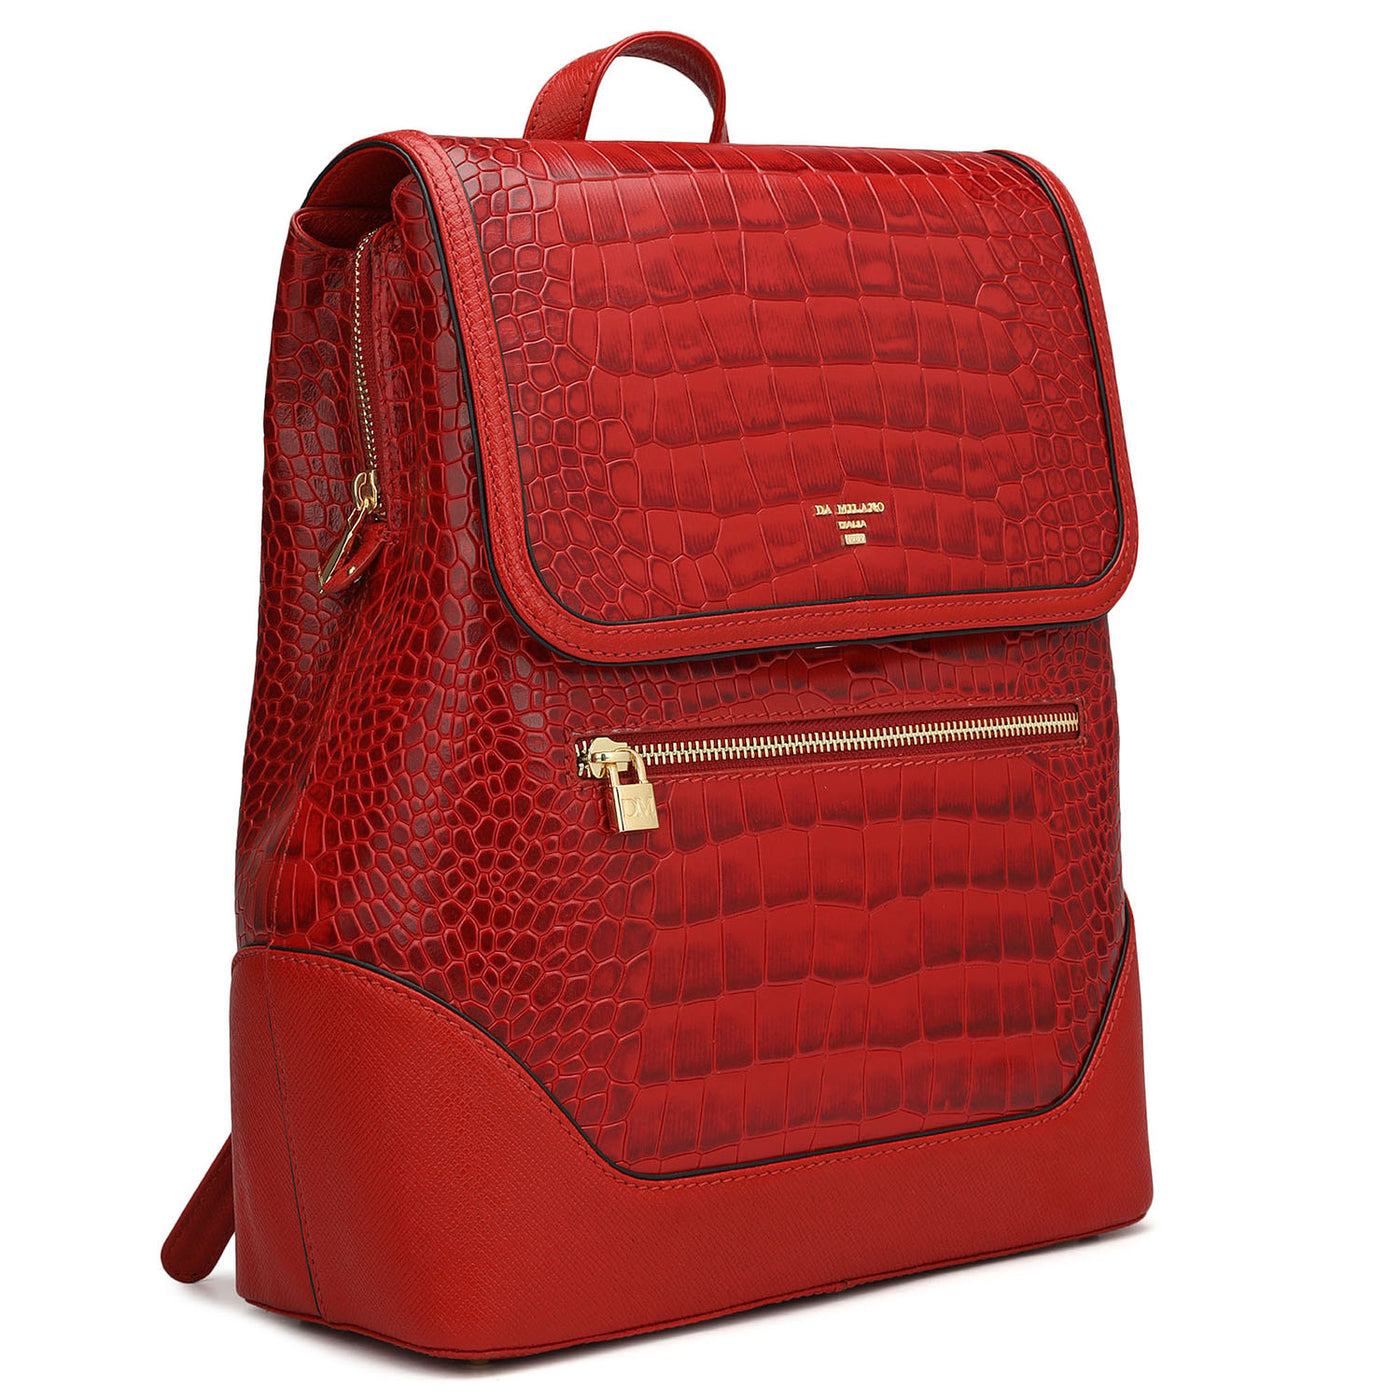 Croco Franzy Leather Backpack - Red